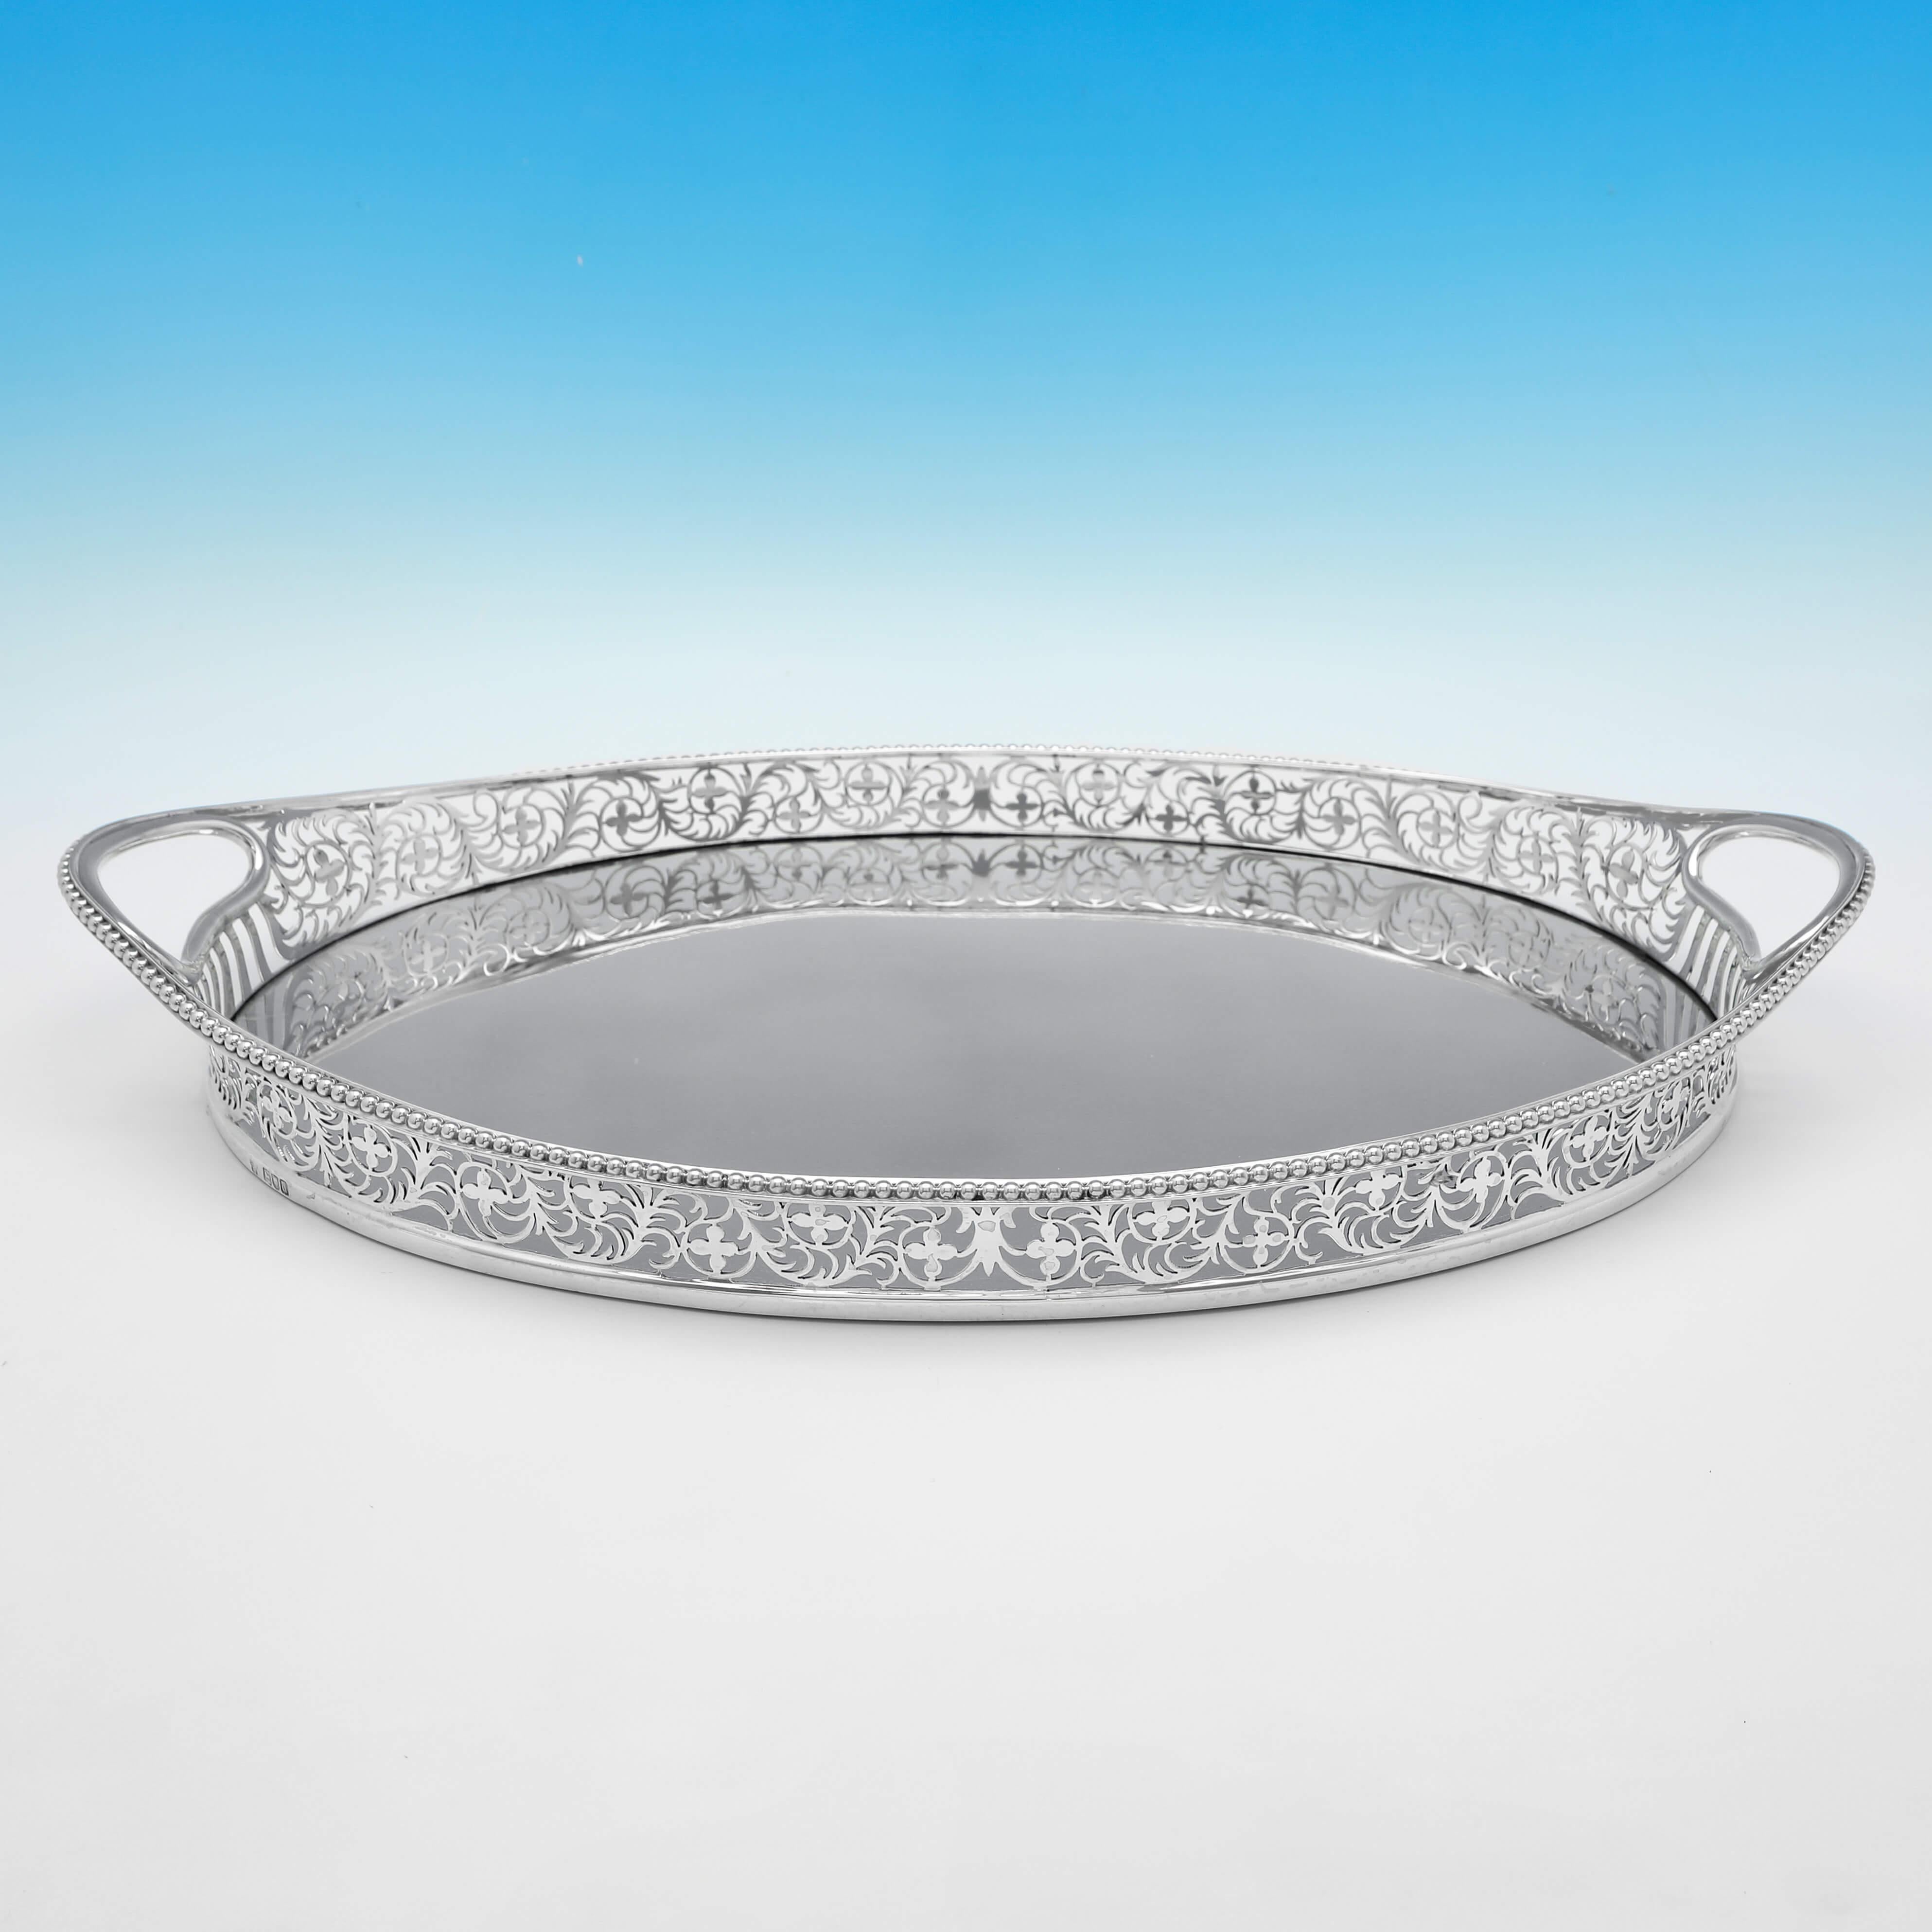 Hallmarked in London in 1899 by Charles Stuart Harris, this attractive, Victorian, Antique Sterling Silver Gallery Tray, is oval in shape, and has a wonderfully decorative pierced border. 

The tray measures 2.5